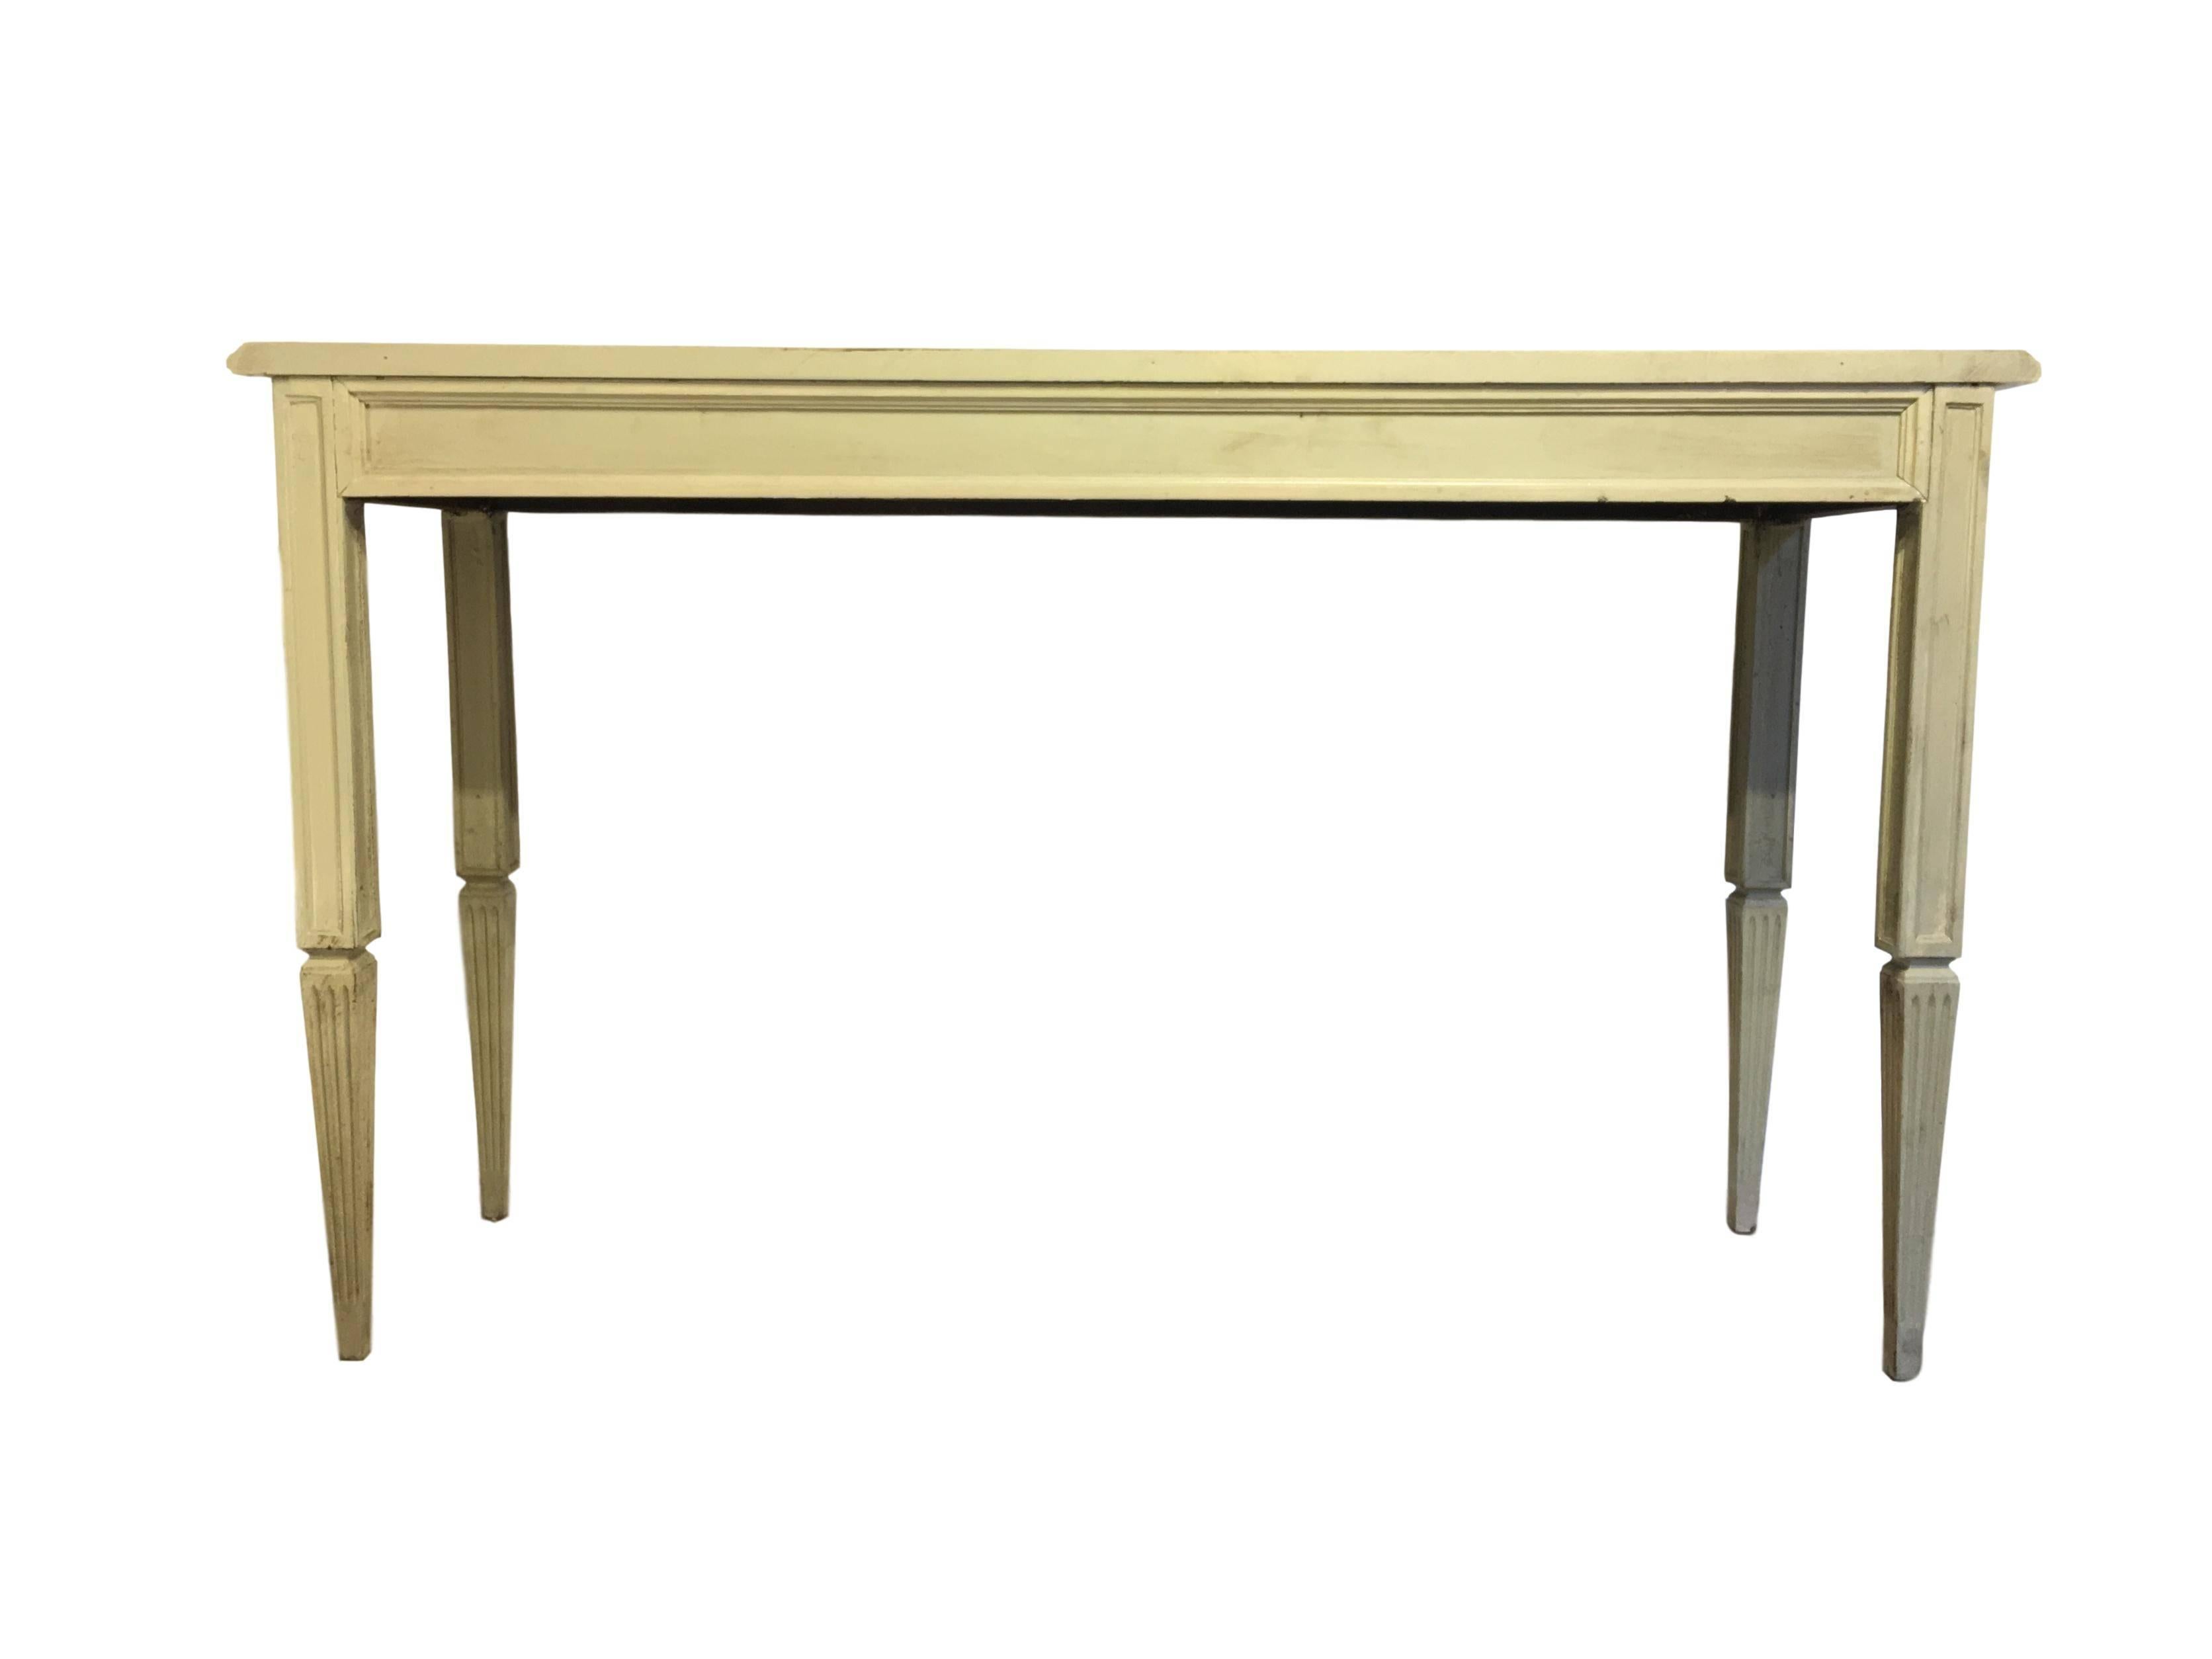 20th century painted cream beige console table with ornamental carved relief in the front.
 